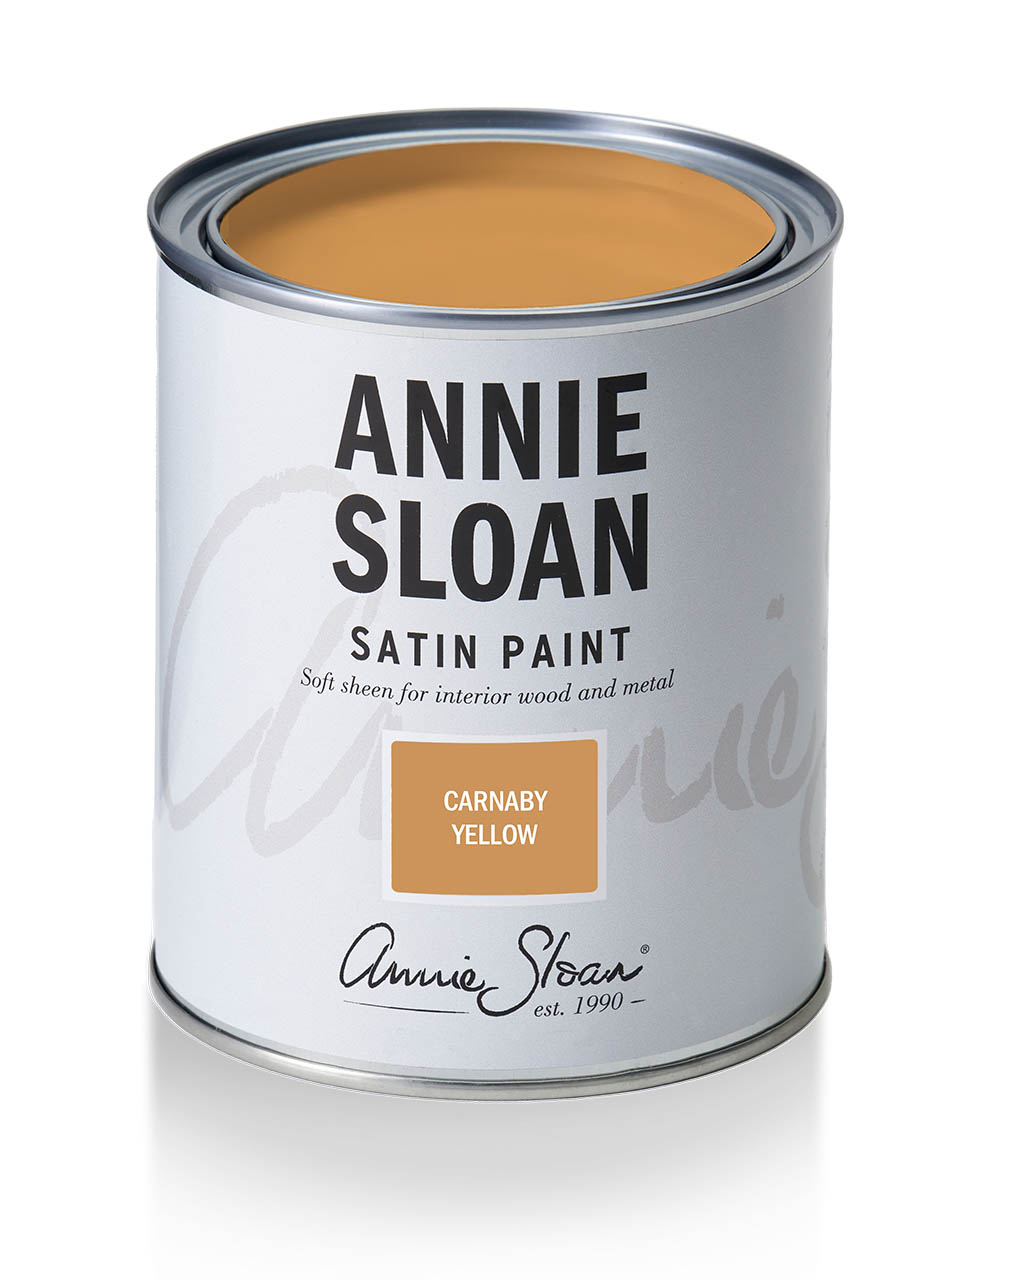 Carnaby Yellow Satin Paint by Annie Sloan - tin shot